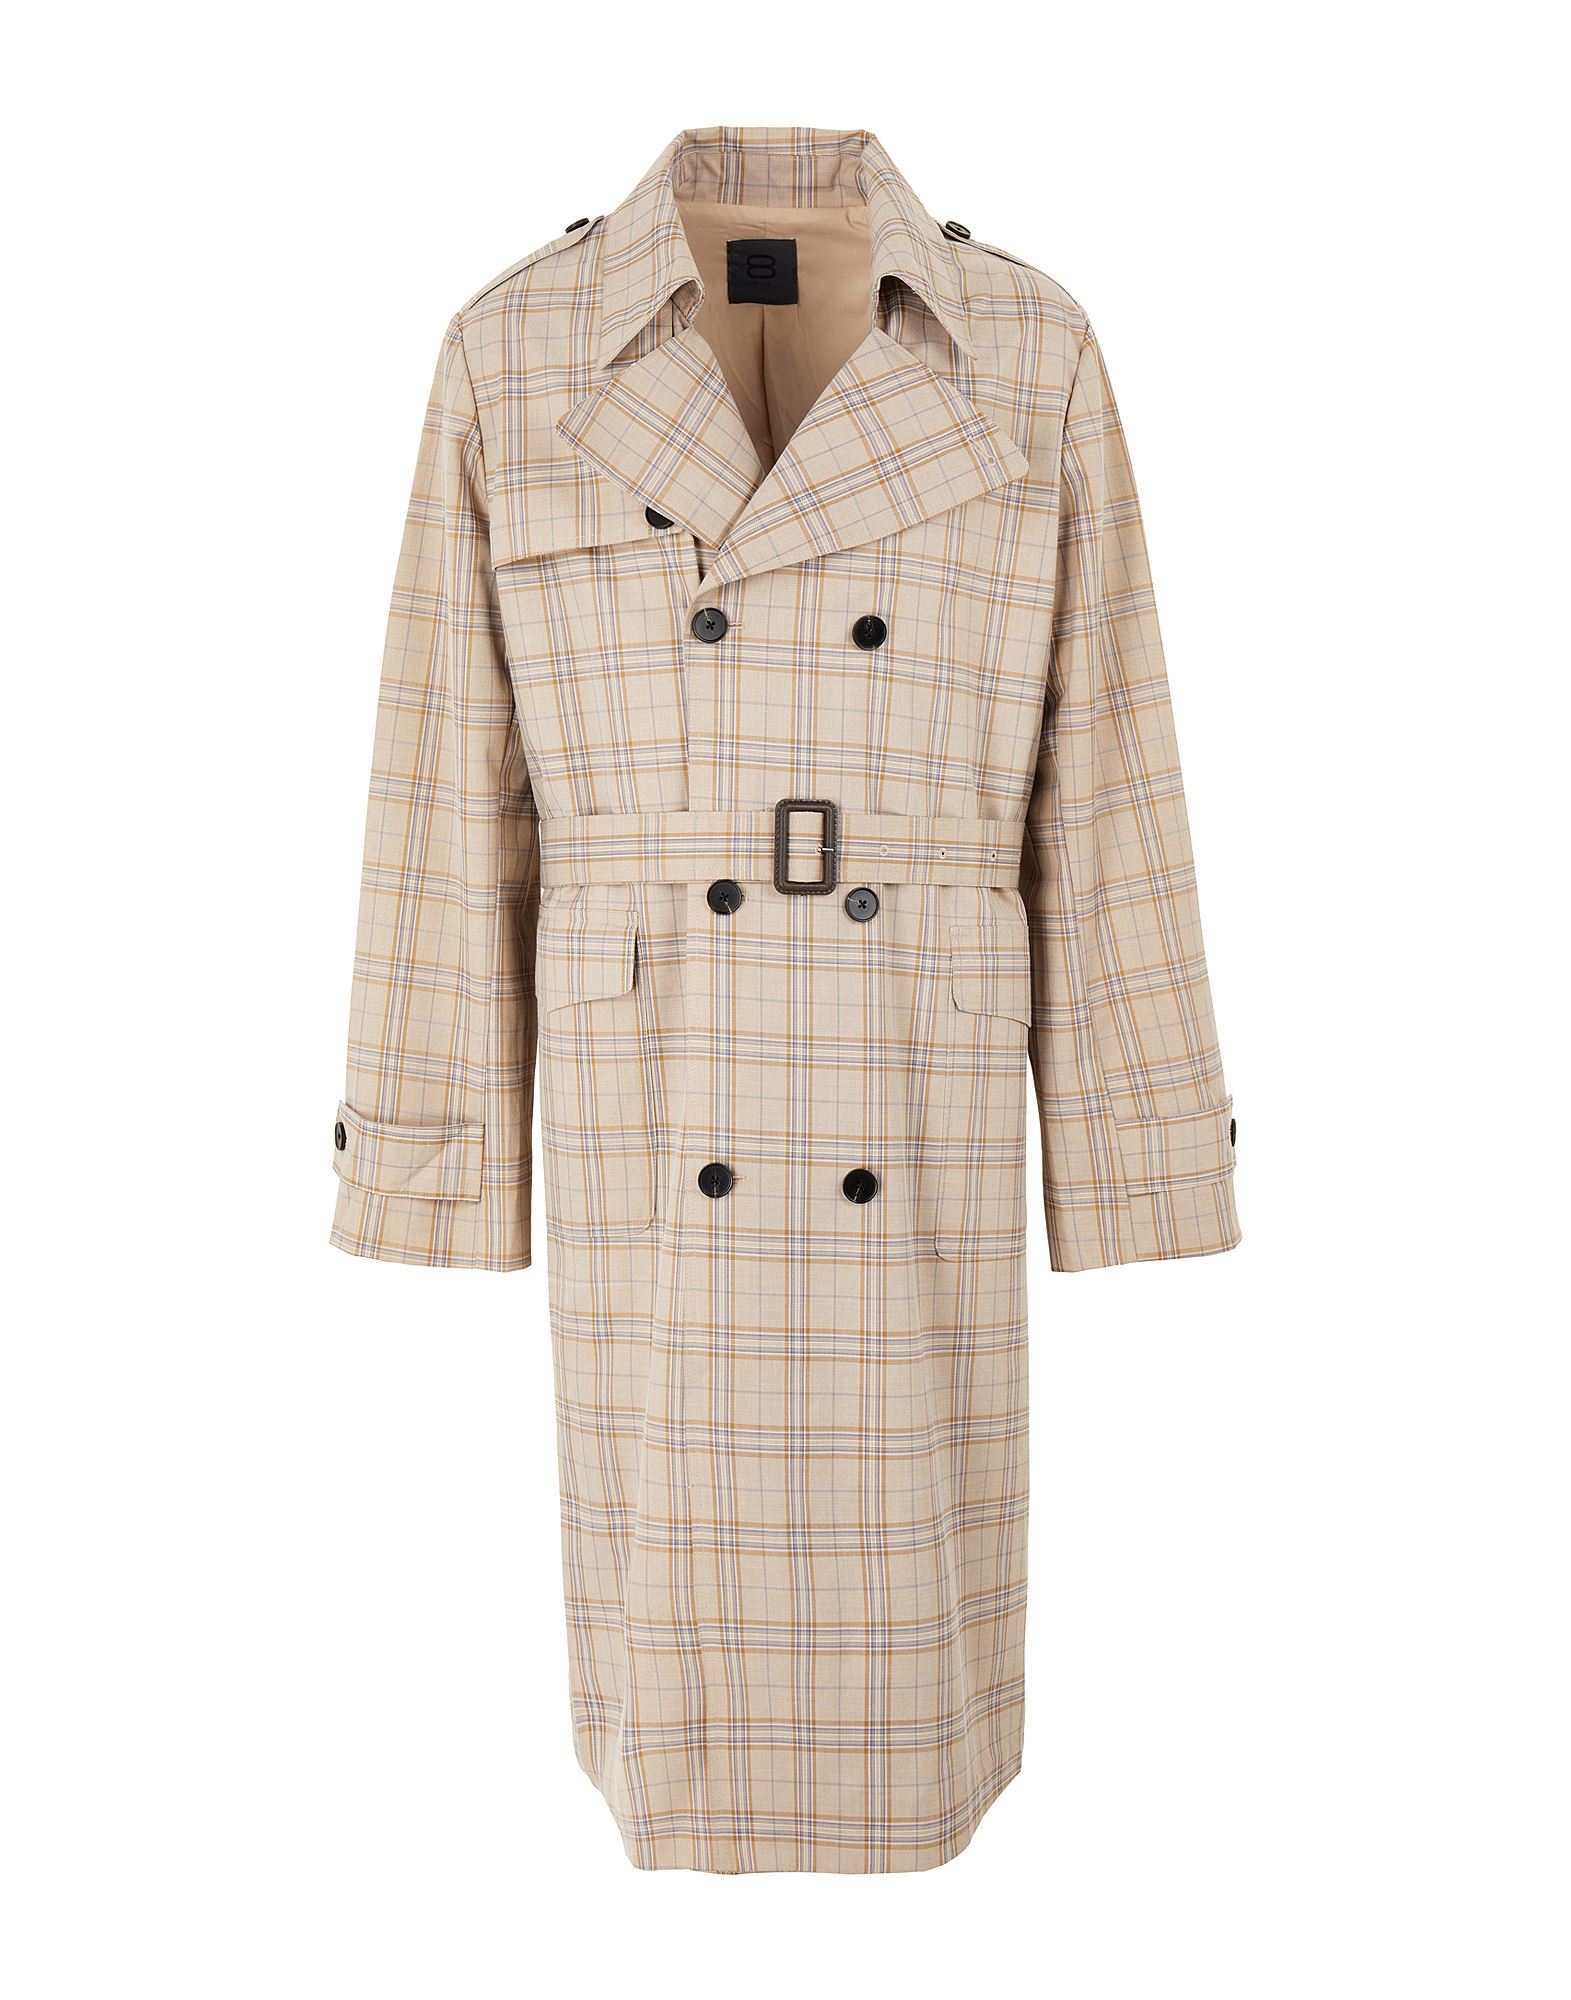 ＜YOOX＞ ★59%OFF！8 by YOOX メンズ ライトコート ベージュ 46 ナイロン 62% / レーヨン 38% CHECKED RELAXED FIT TRENCH